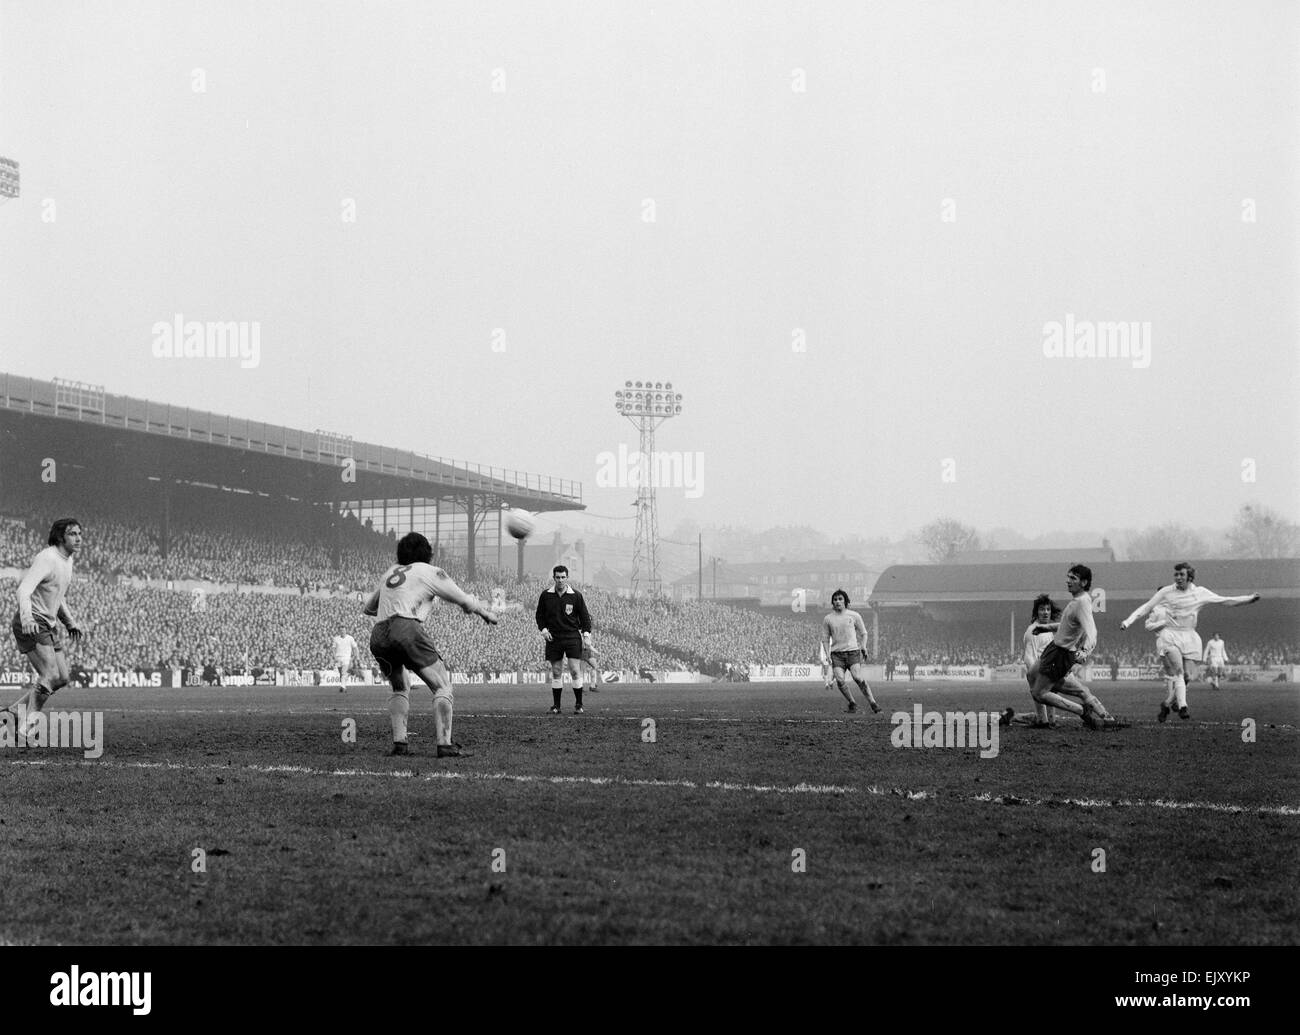 FA Cup Quarter Final match at Elland Road. Leeds United 2 v Tottenham Hotspur 1. Action during the match with Leeds on the attack. 18th March 1972. Stock Photo